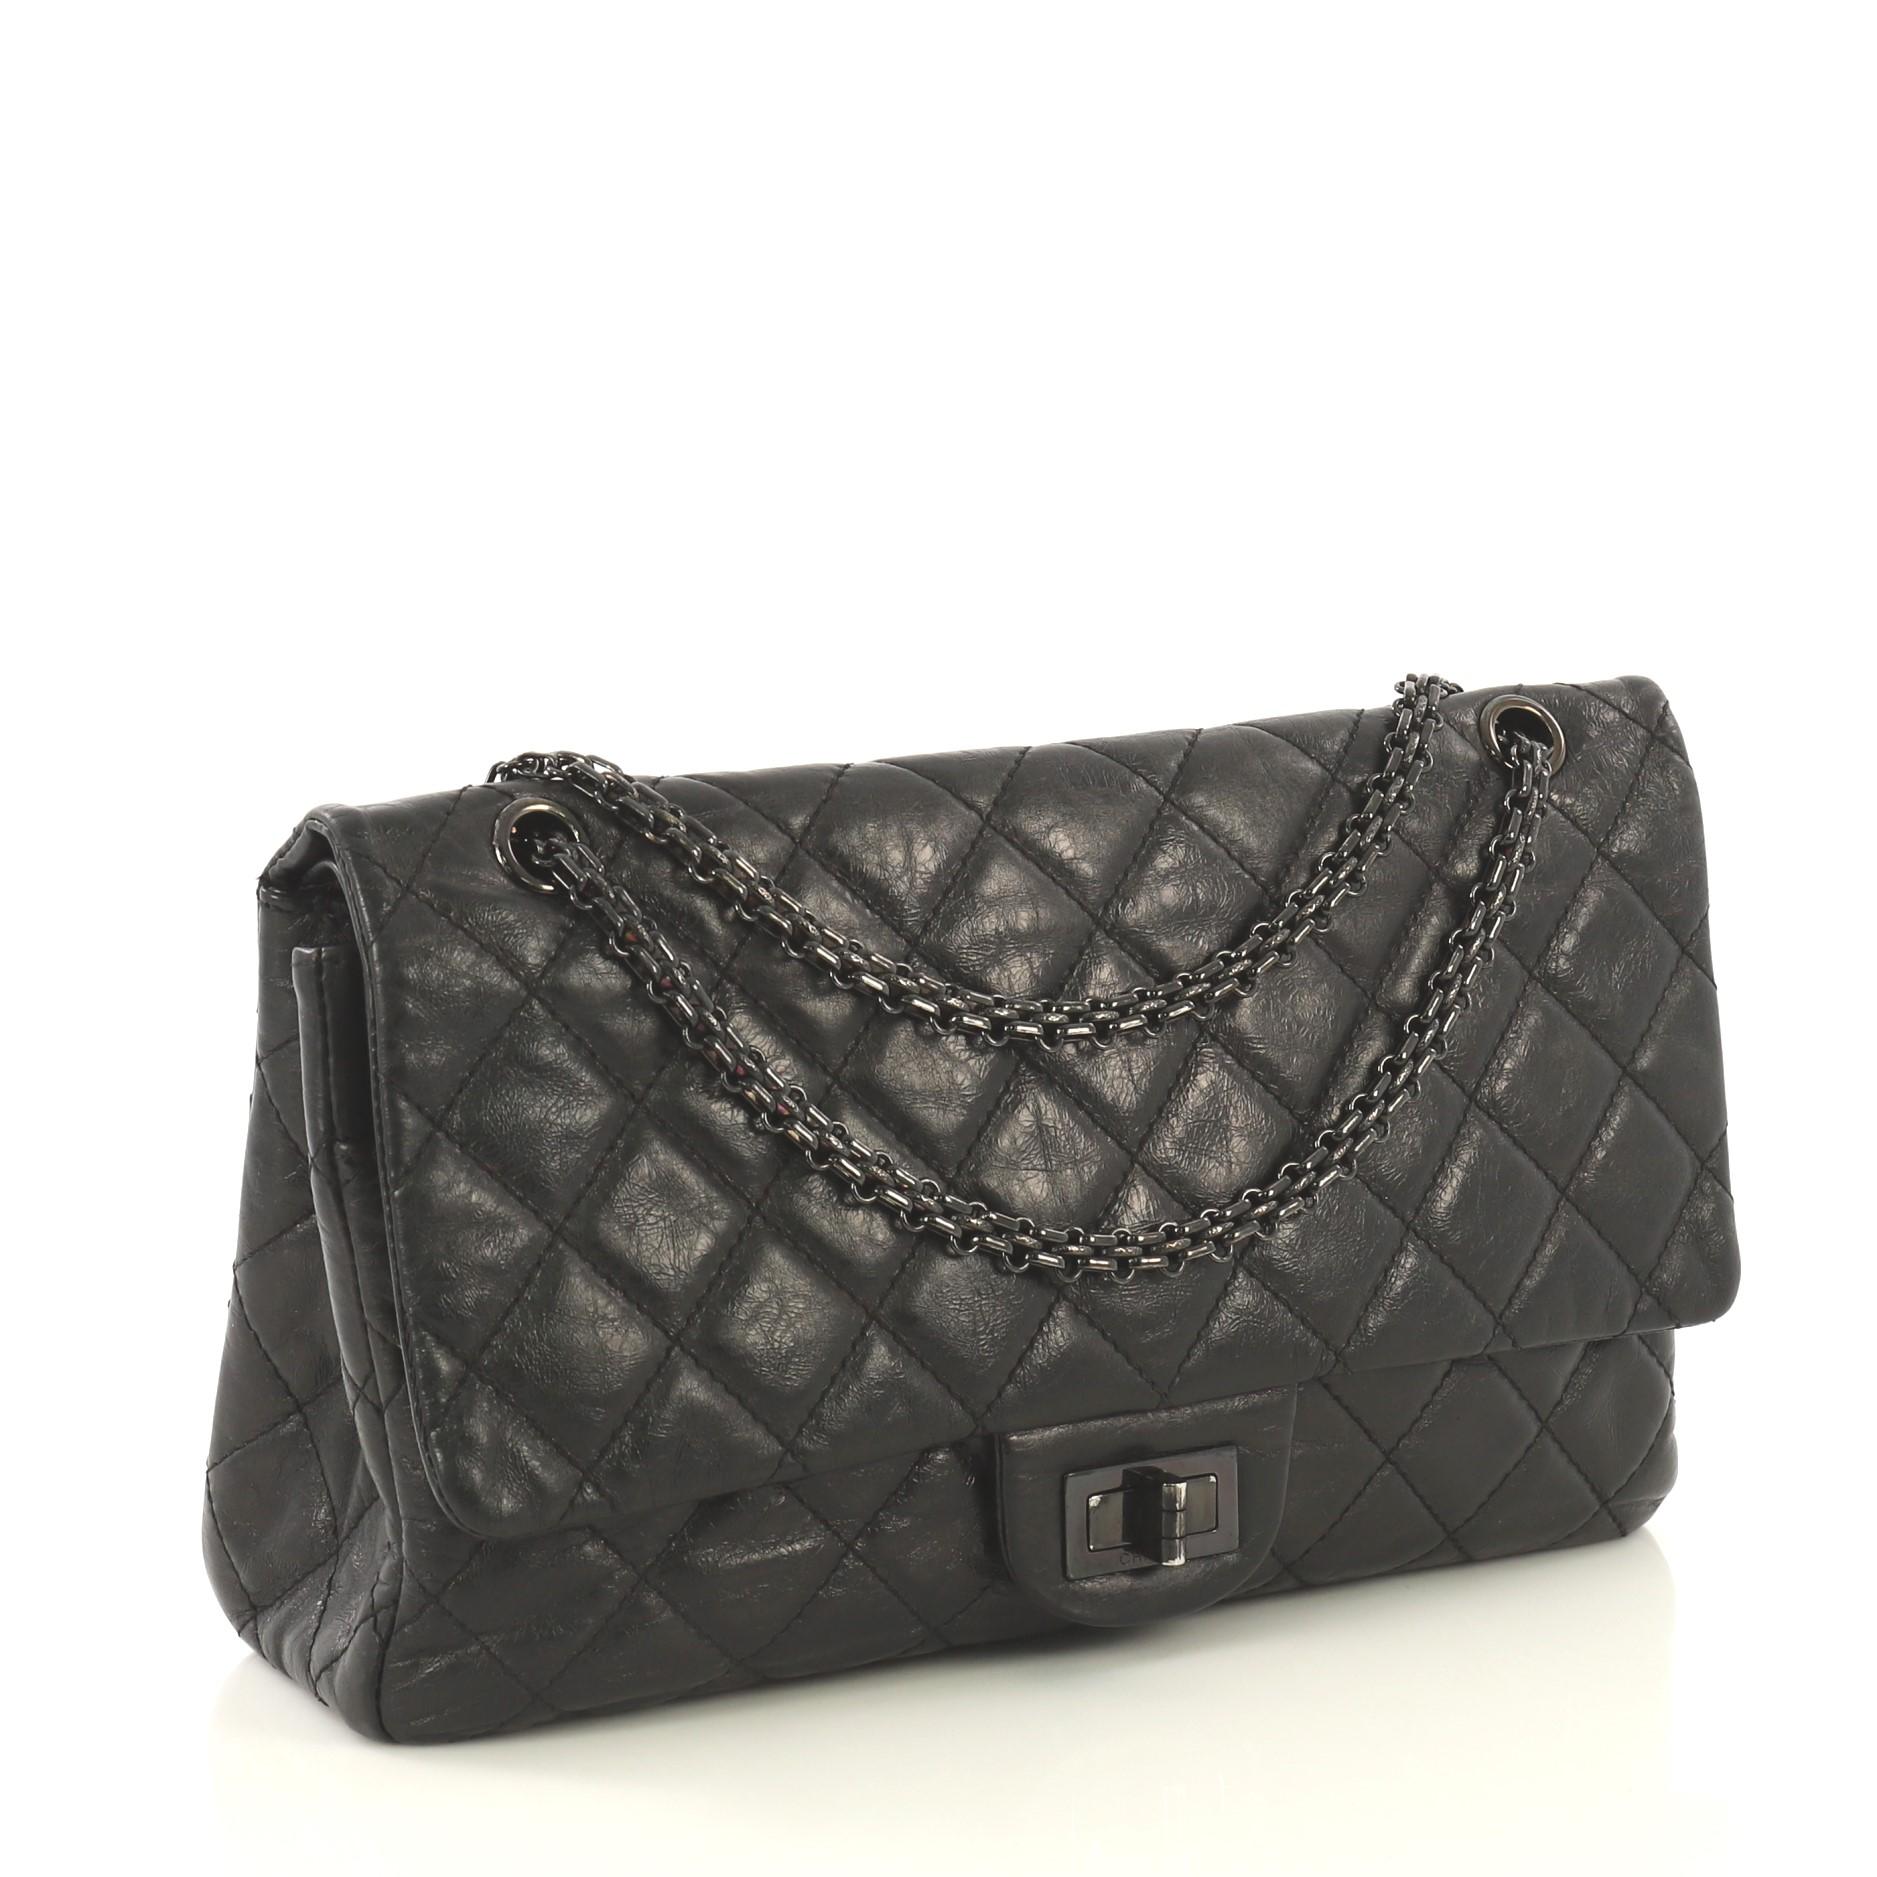 This Chanel So Black Reissue 2.55 Flap Bag Quilted Glazed Aged Calfskin 227, crafted from black quilted glazed aged calfskin leather, features reissue chain link strap, exterior back slip pocket, and black-tone hardware. Its mademoiselle turn-lock